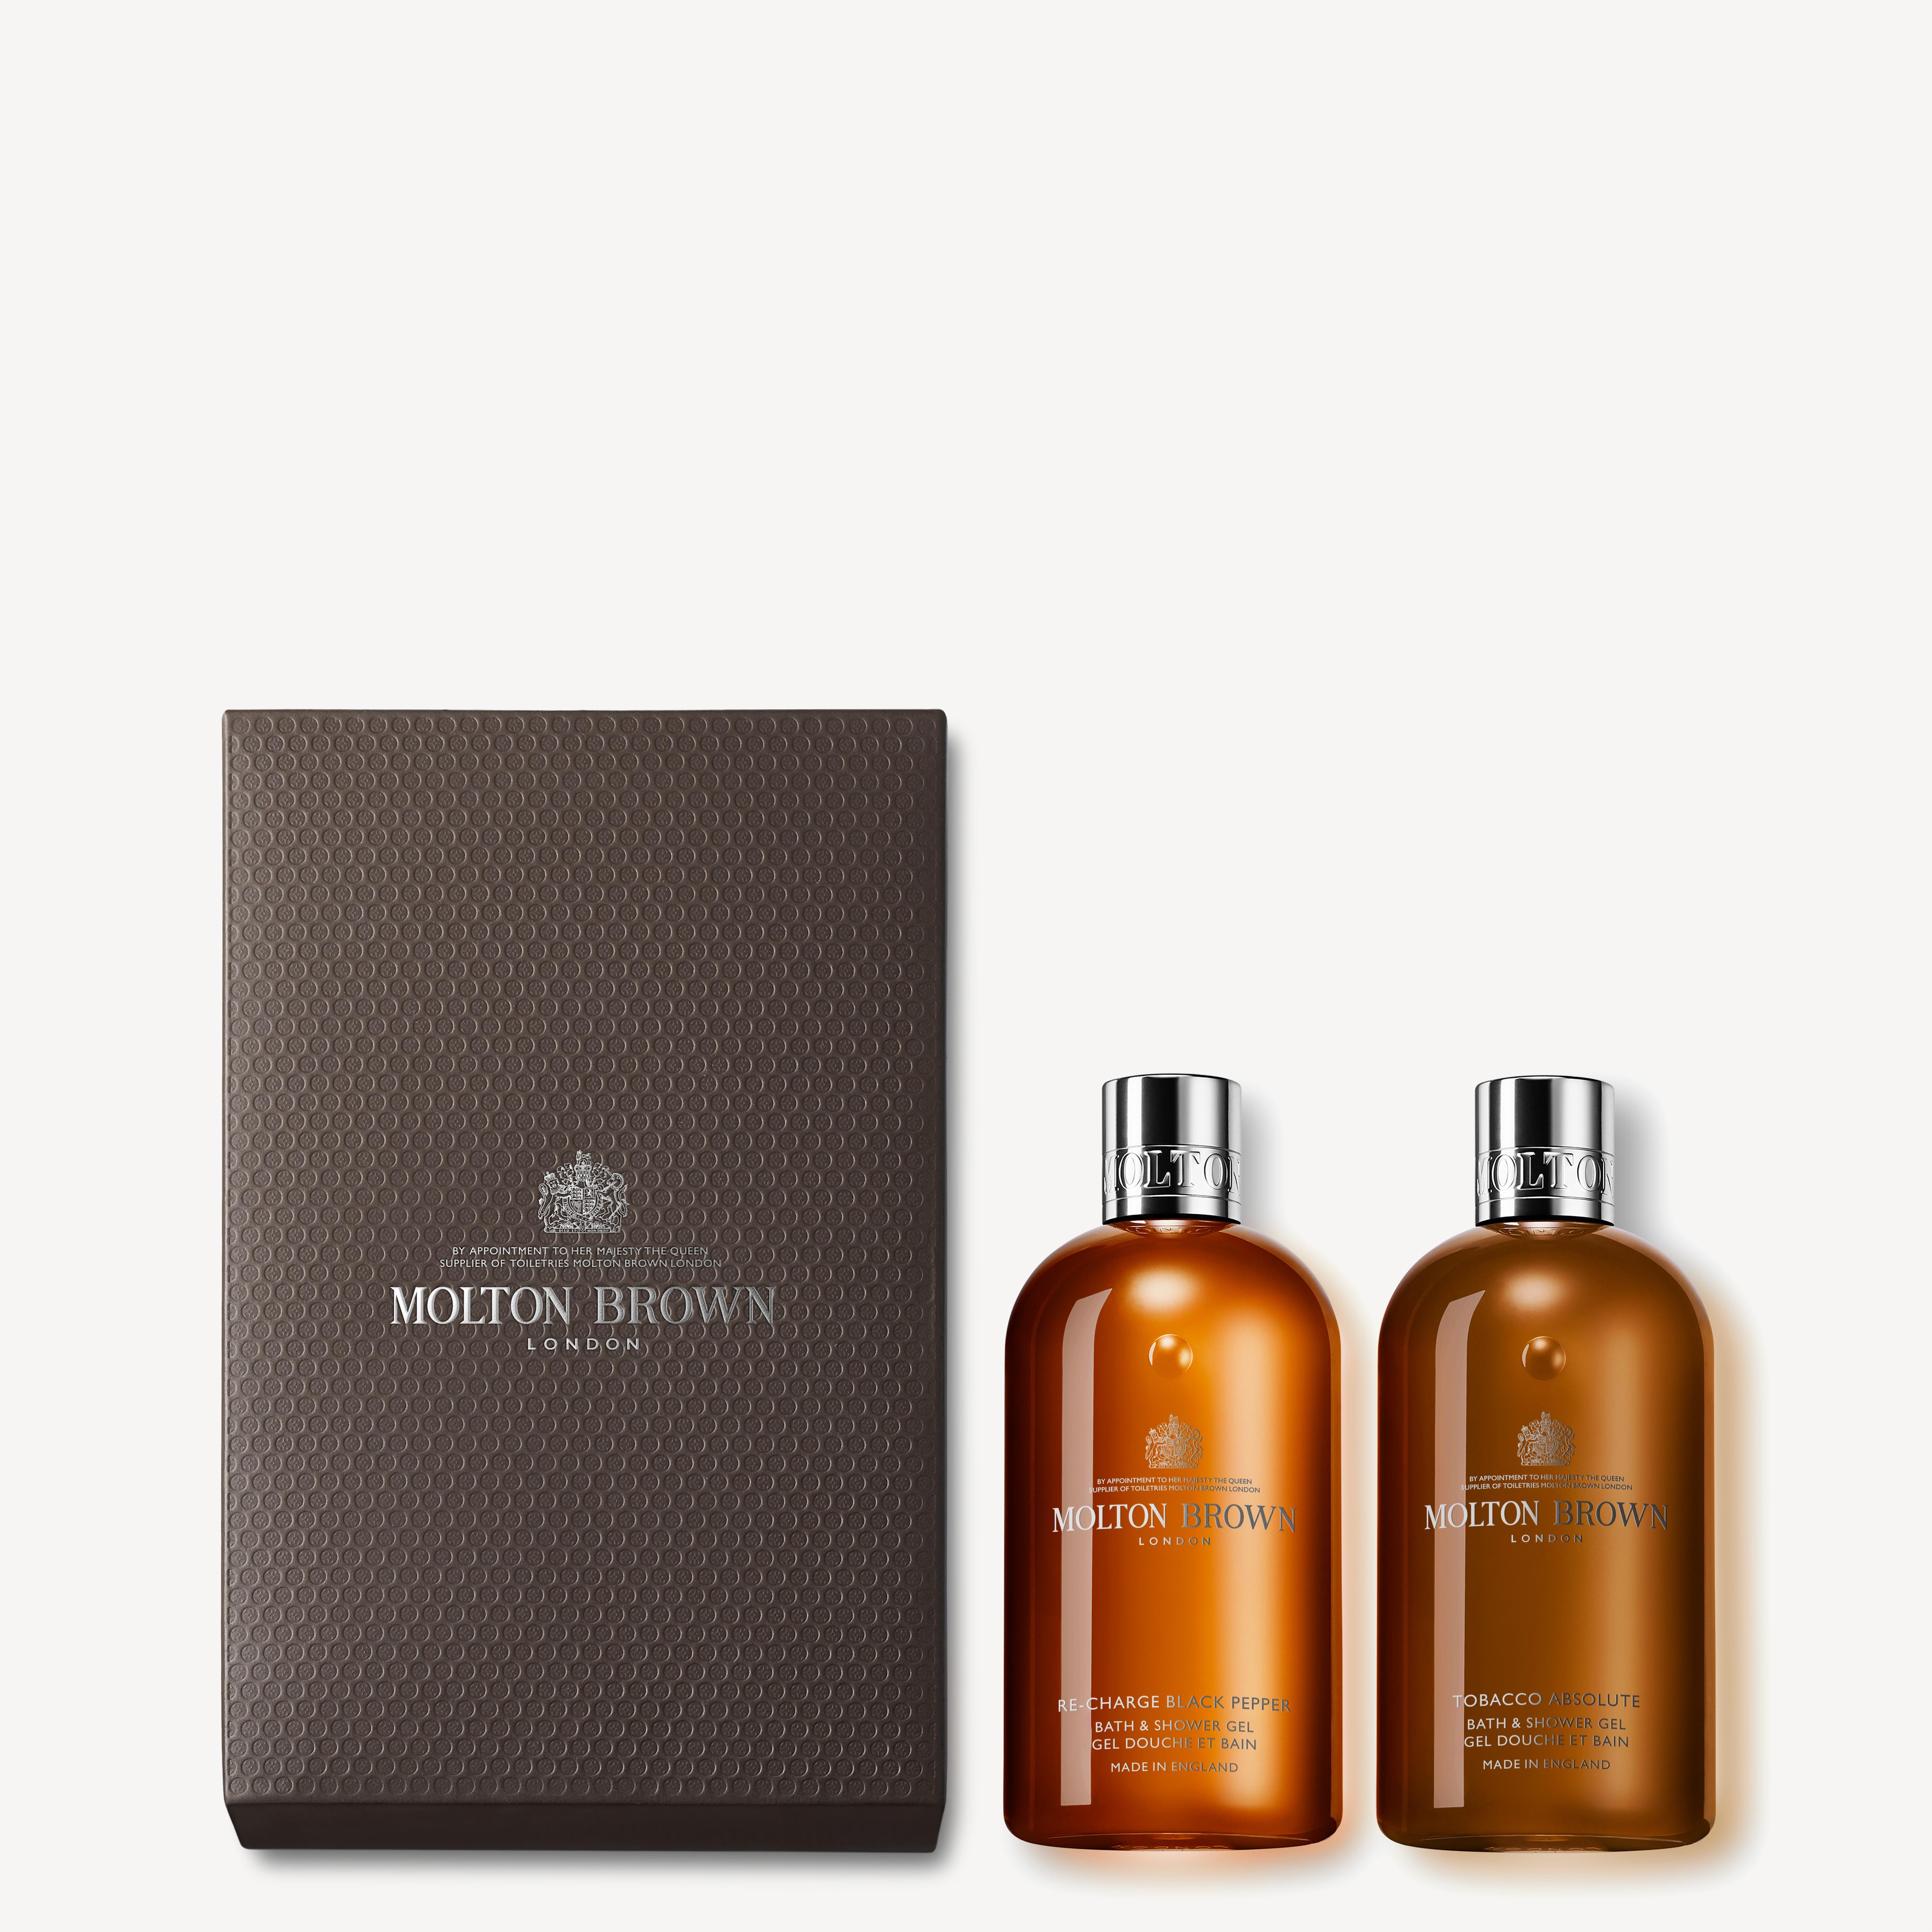 Molton Brown Re-charge Black Pepper & Tobacco Absolute Shower Gel Gift Set